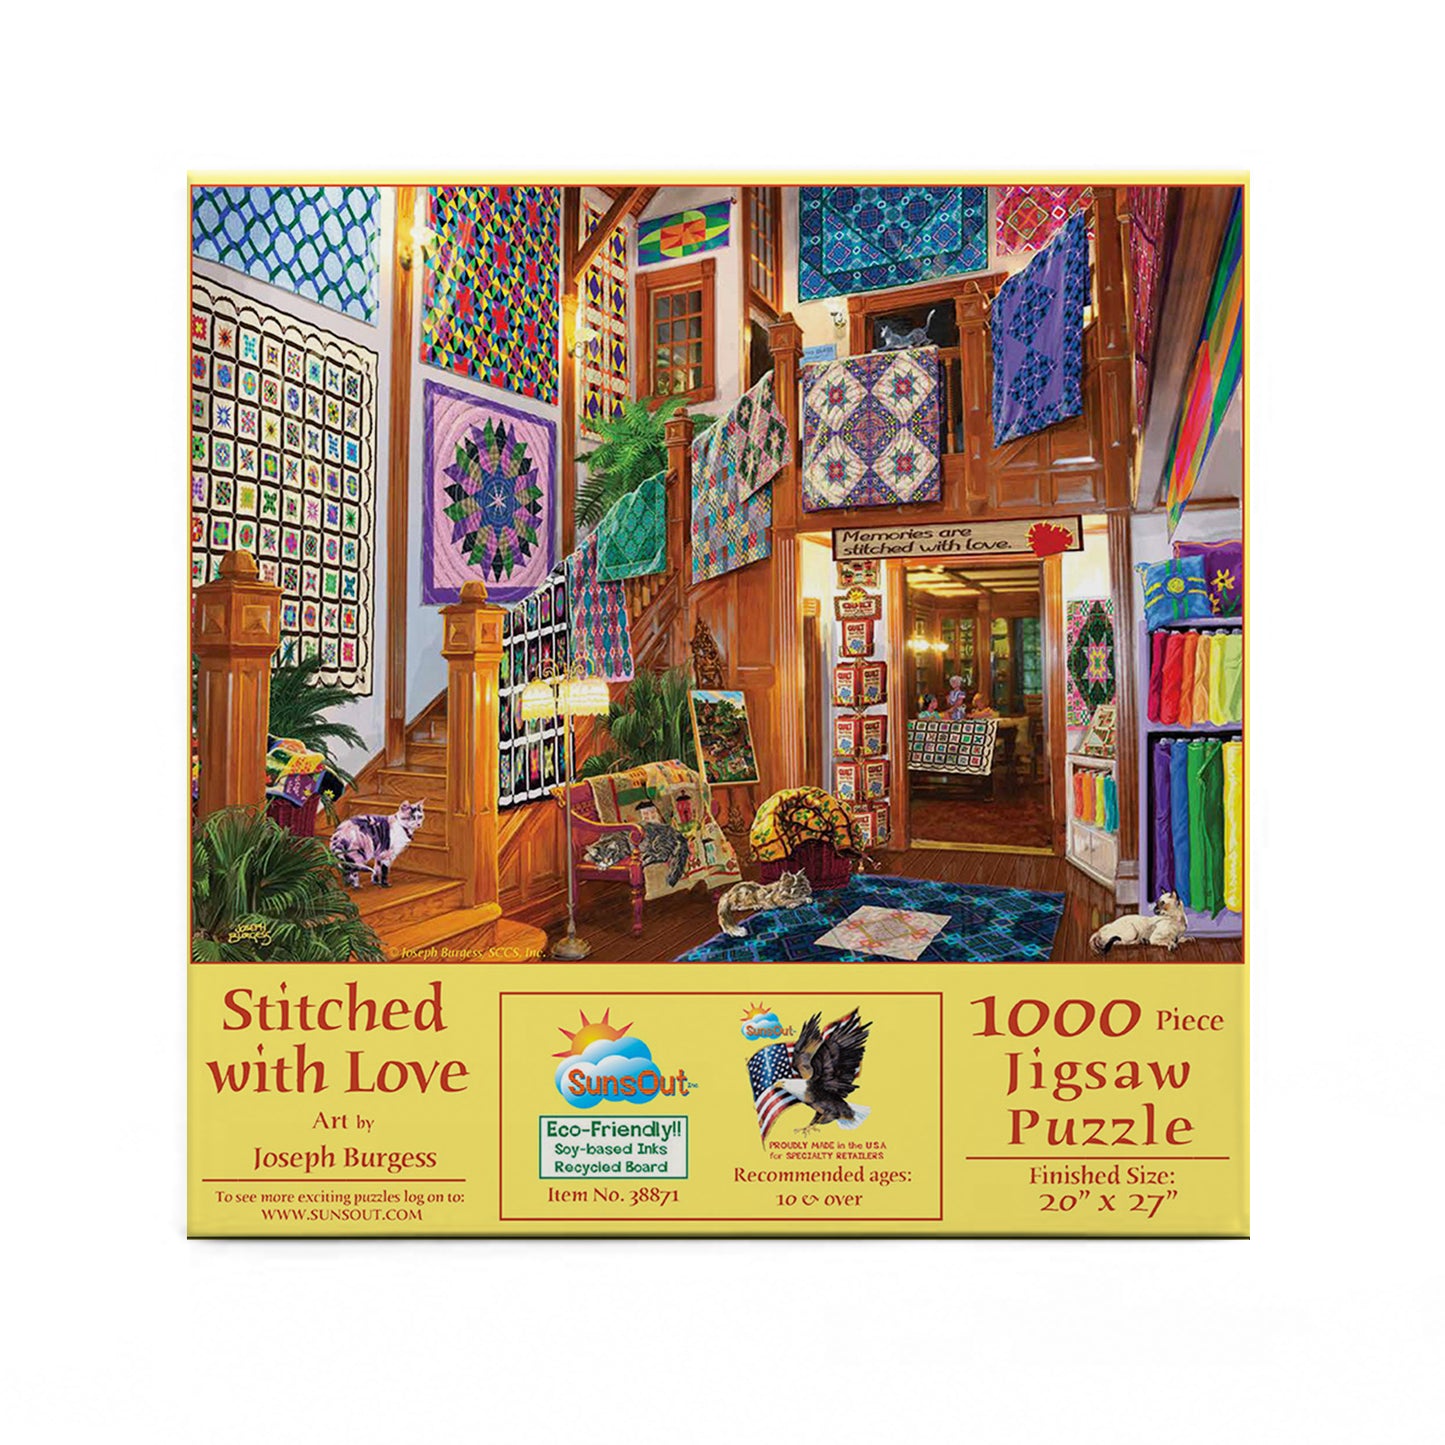 Stitched With Love - 1000 Piece Jigsaw Puzzle